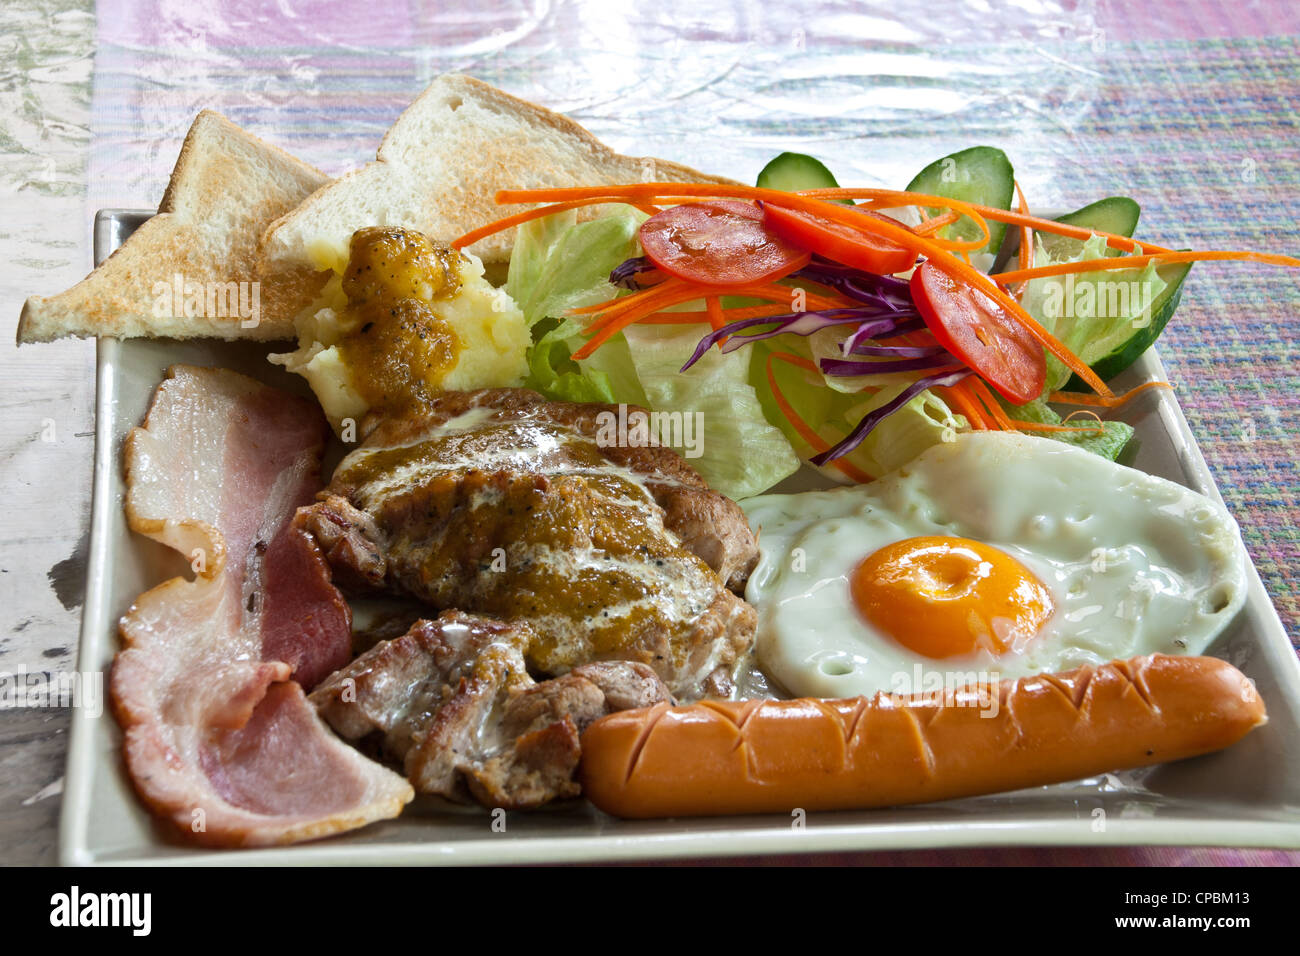 Steak pork, bacon, fried egg, sausage, bread and salad. Stock Photo